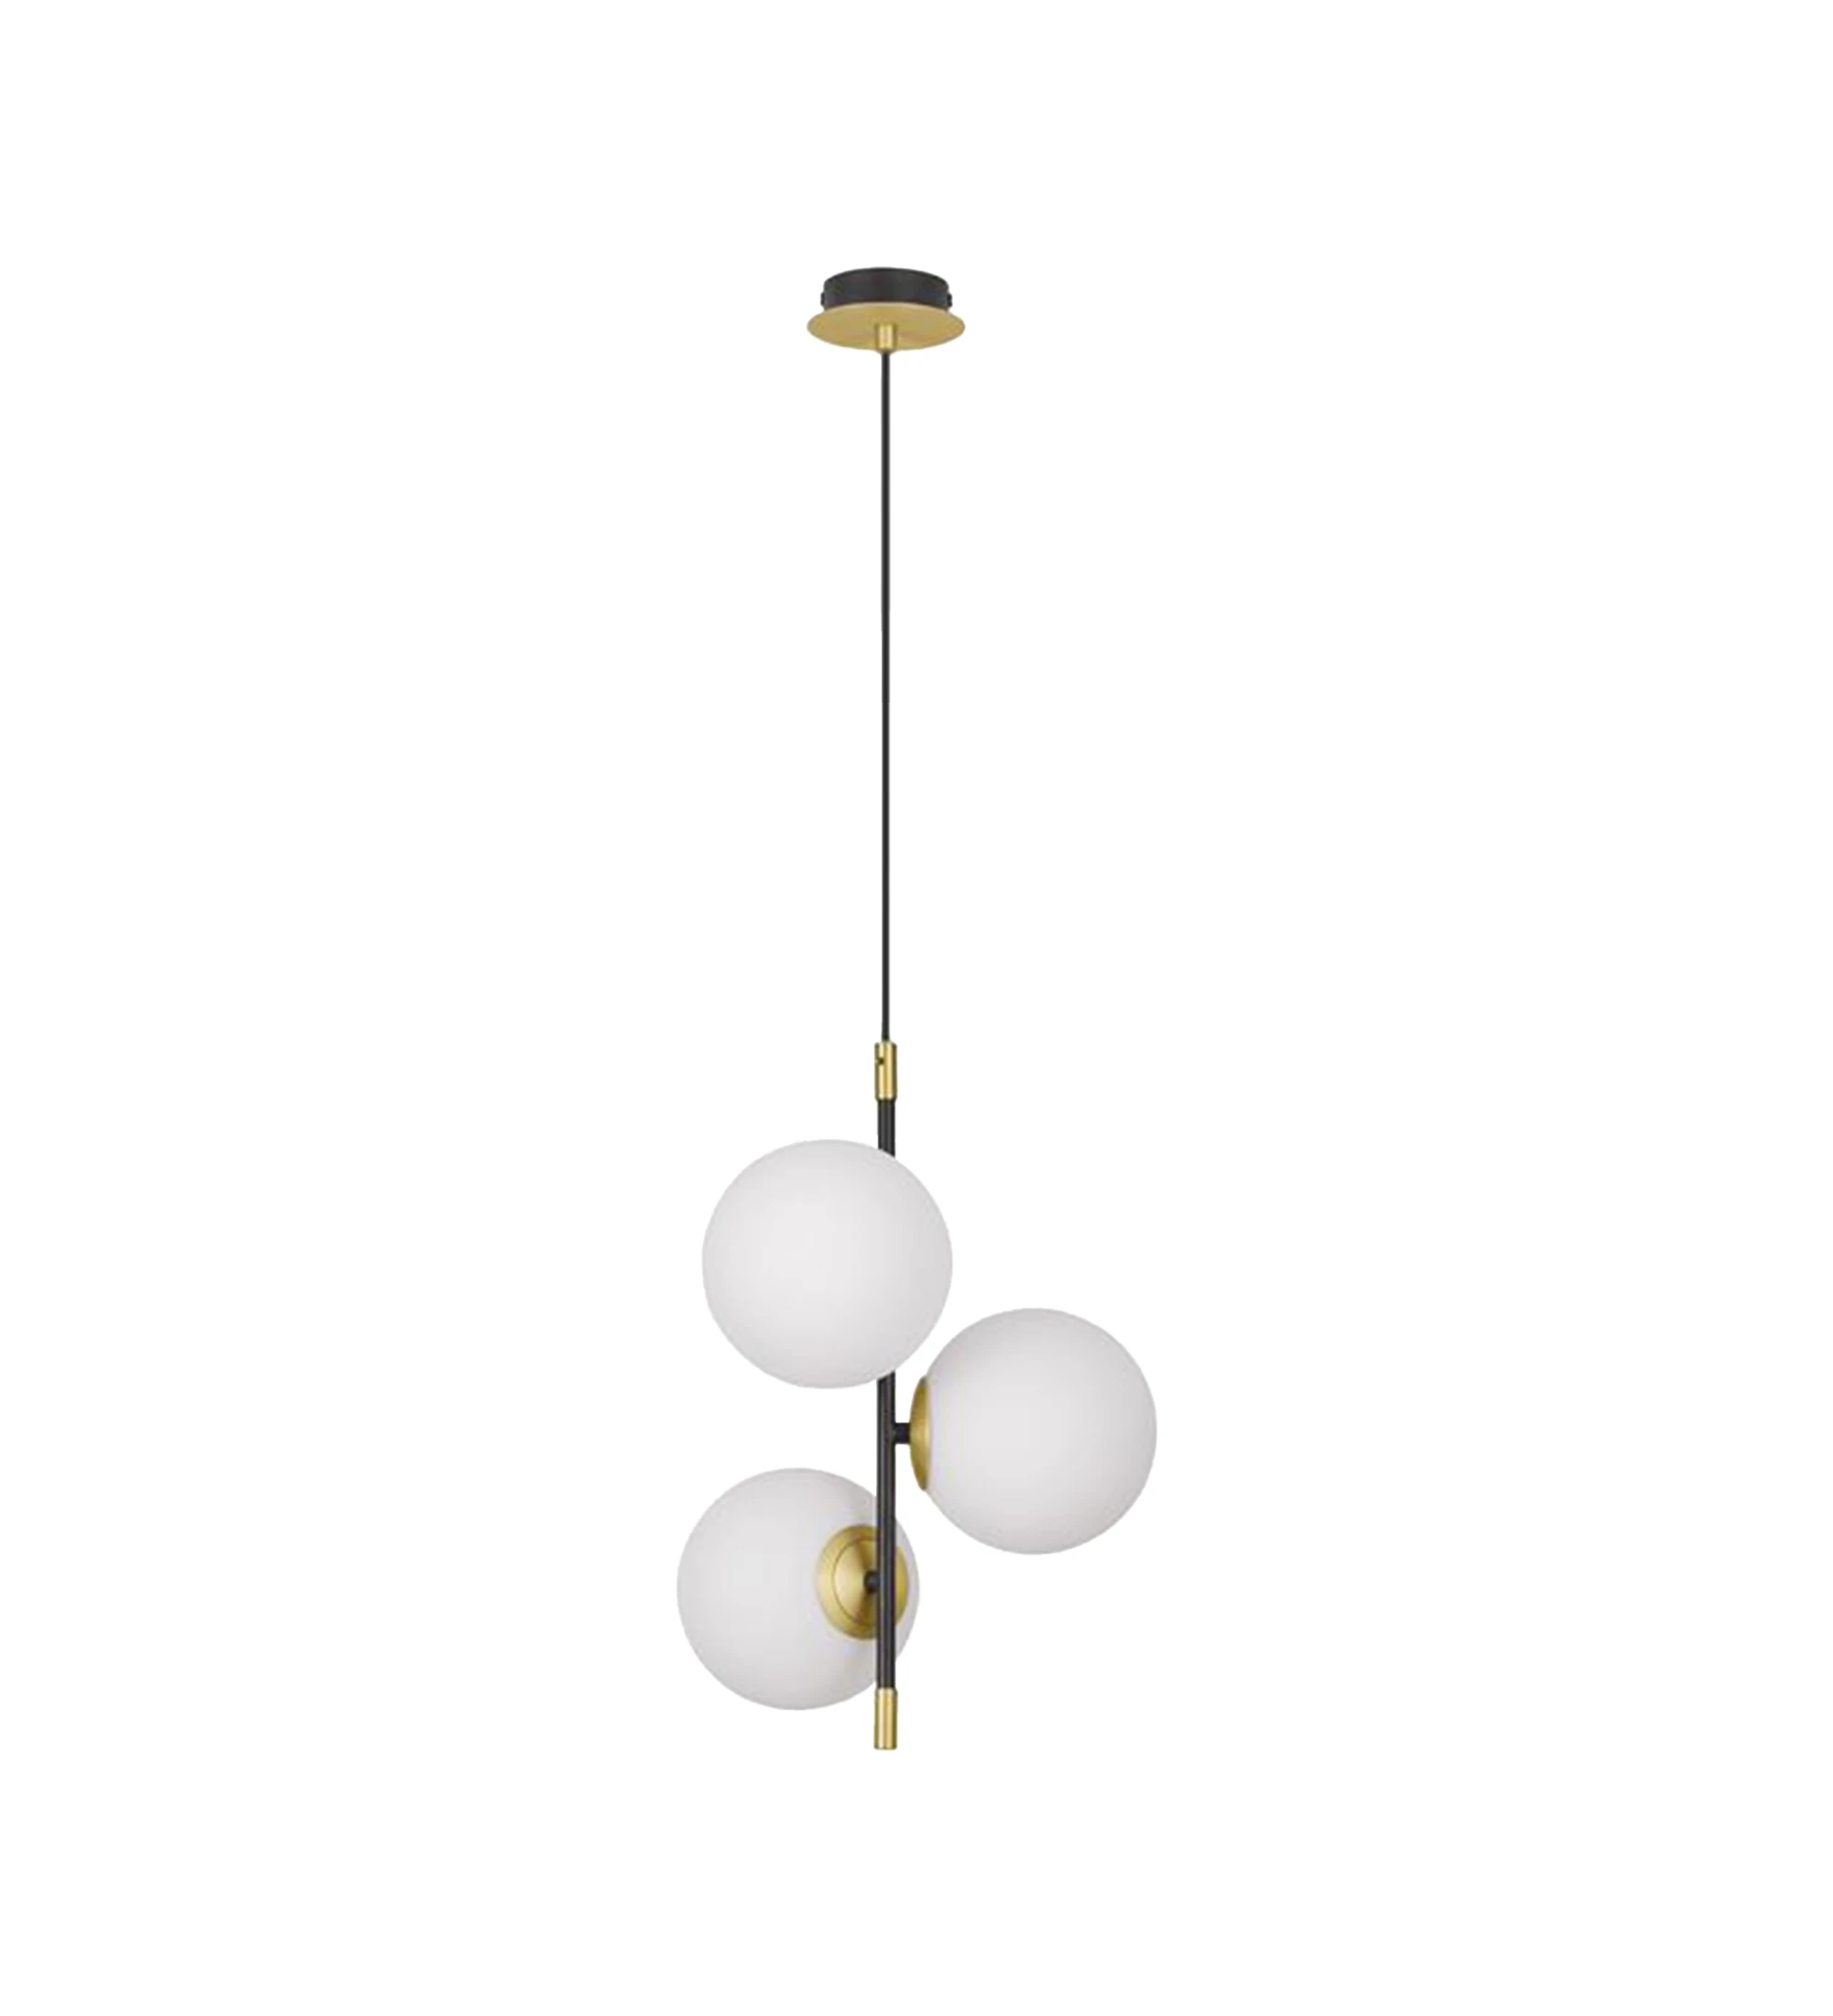  Suspension lamp in black and gold metal with opal glass diffusers.